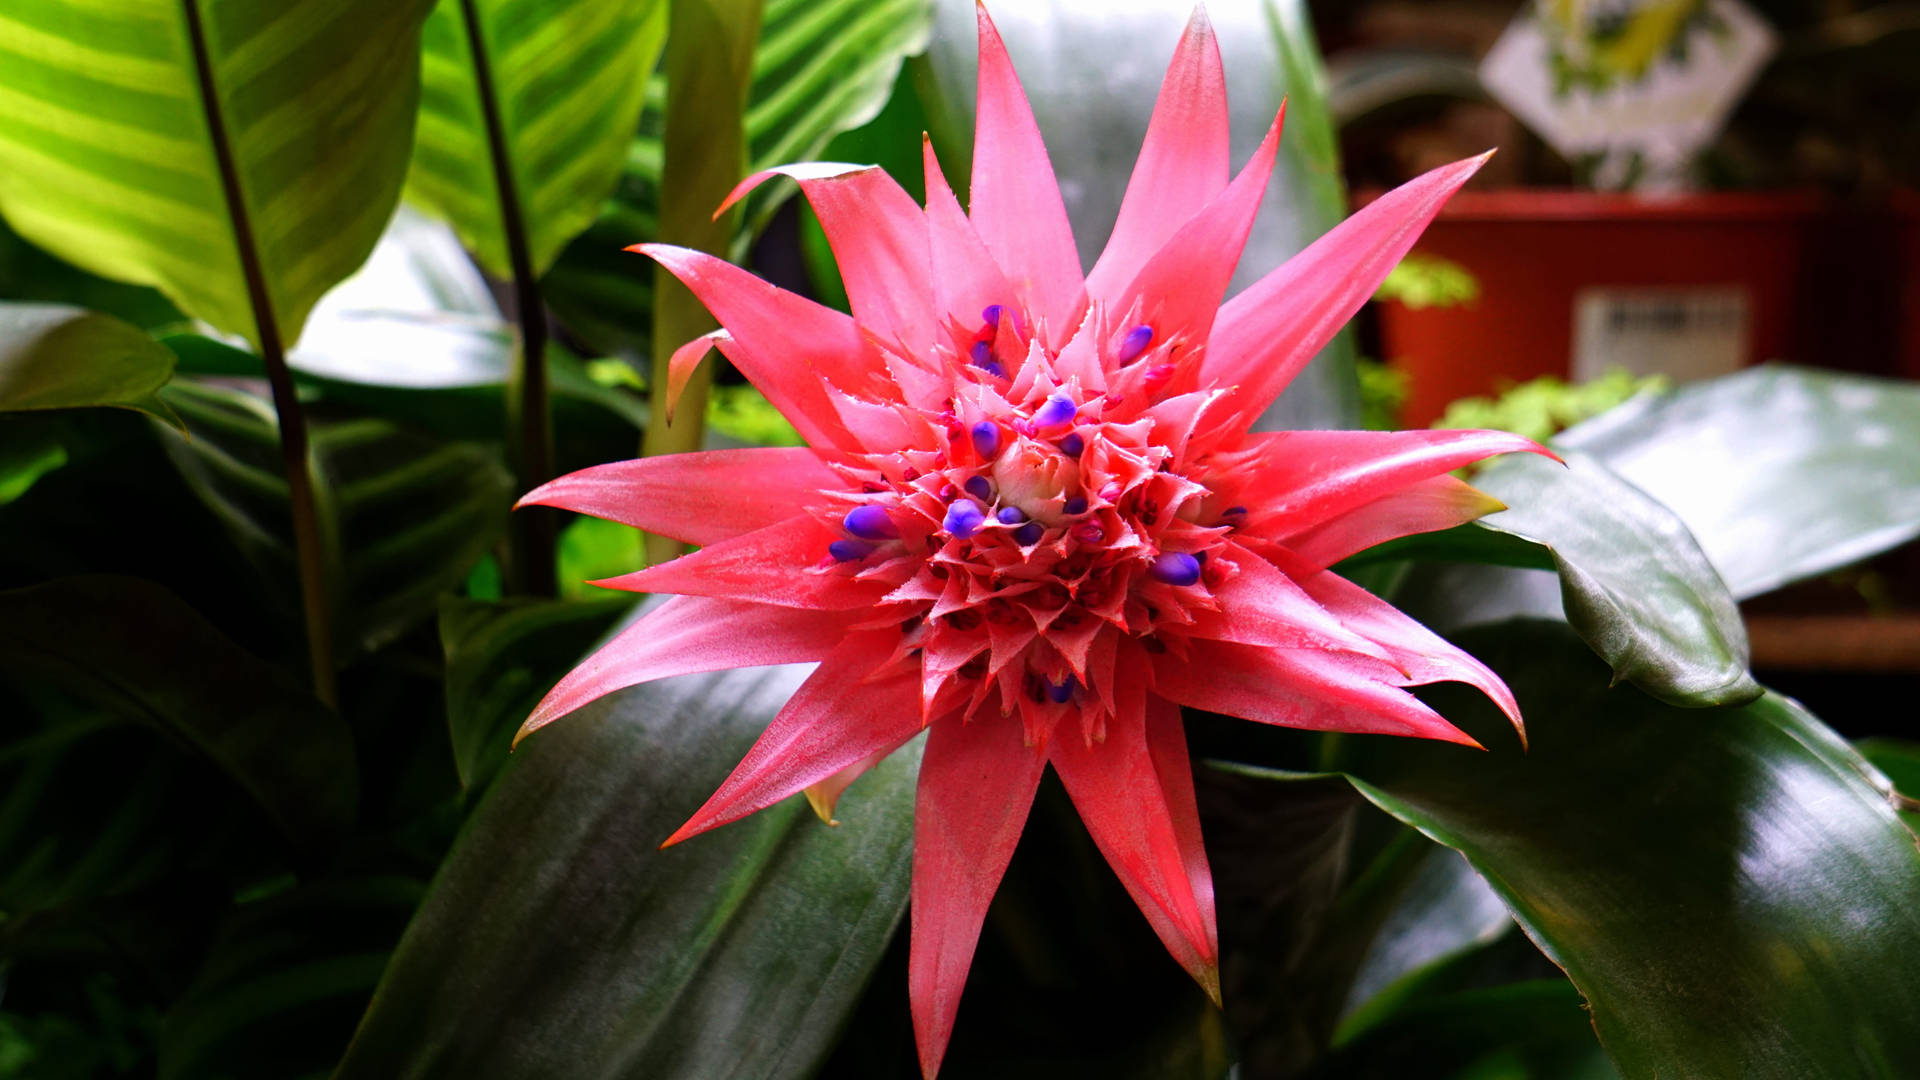 Bromeliad Flower And Green Leaves Wallpaper